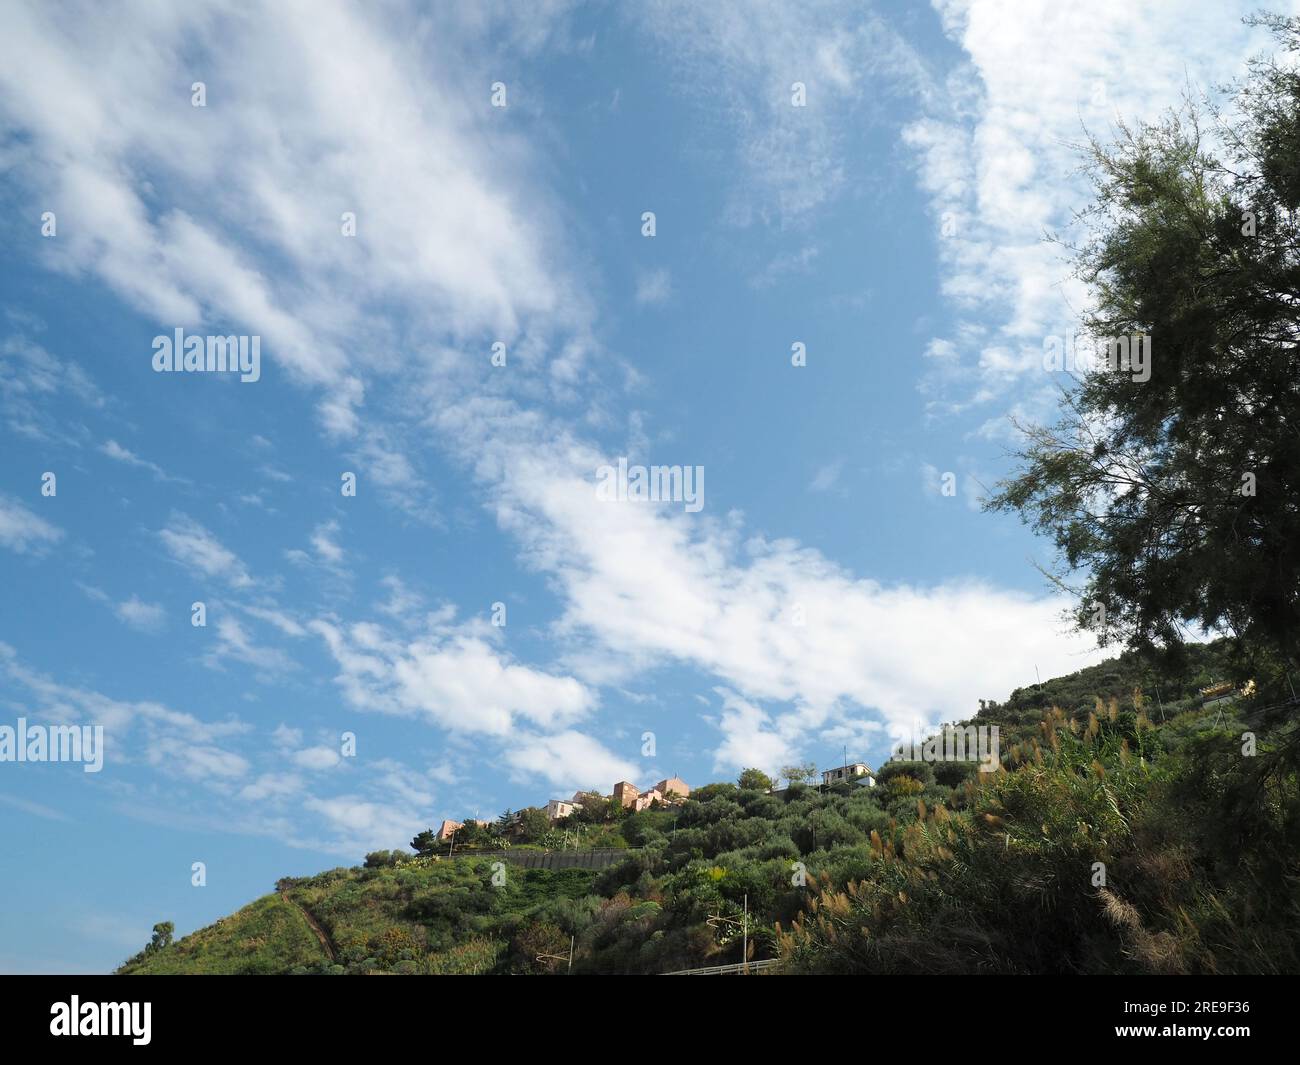 Skyline view of the village of Sant'Ambrogio, taken from the beach below. Stock Photo